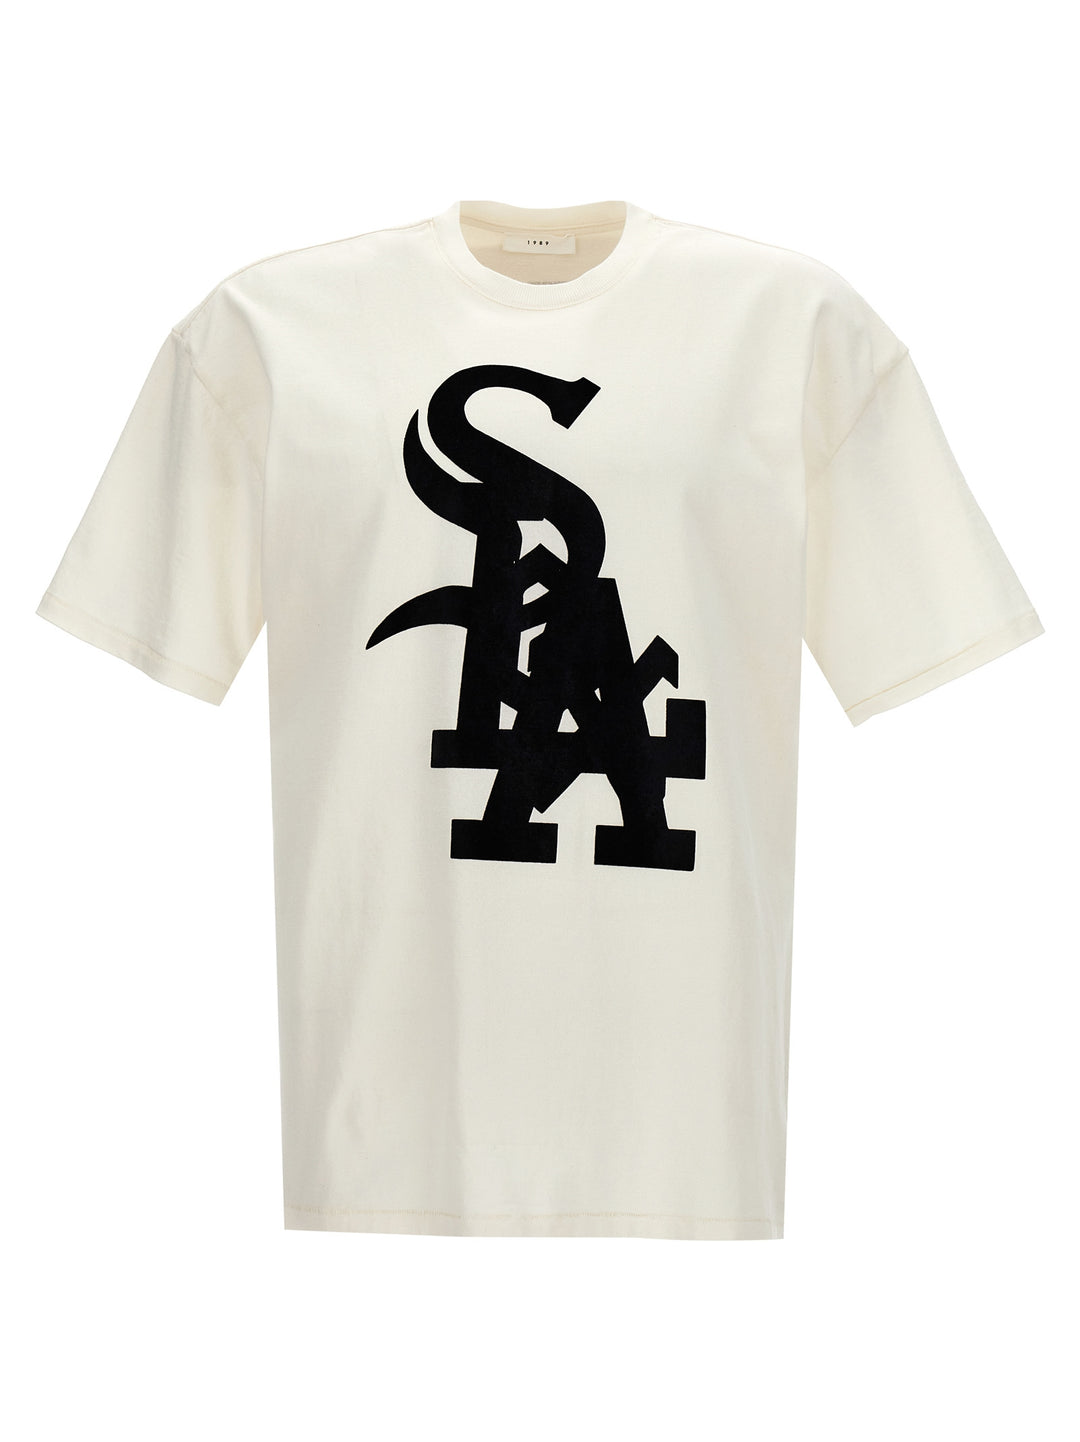 Midwest T Shirt Bianco